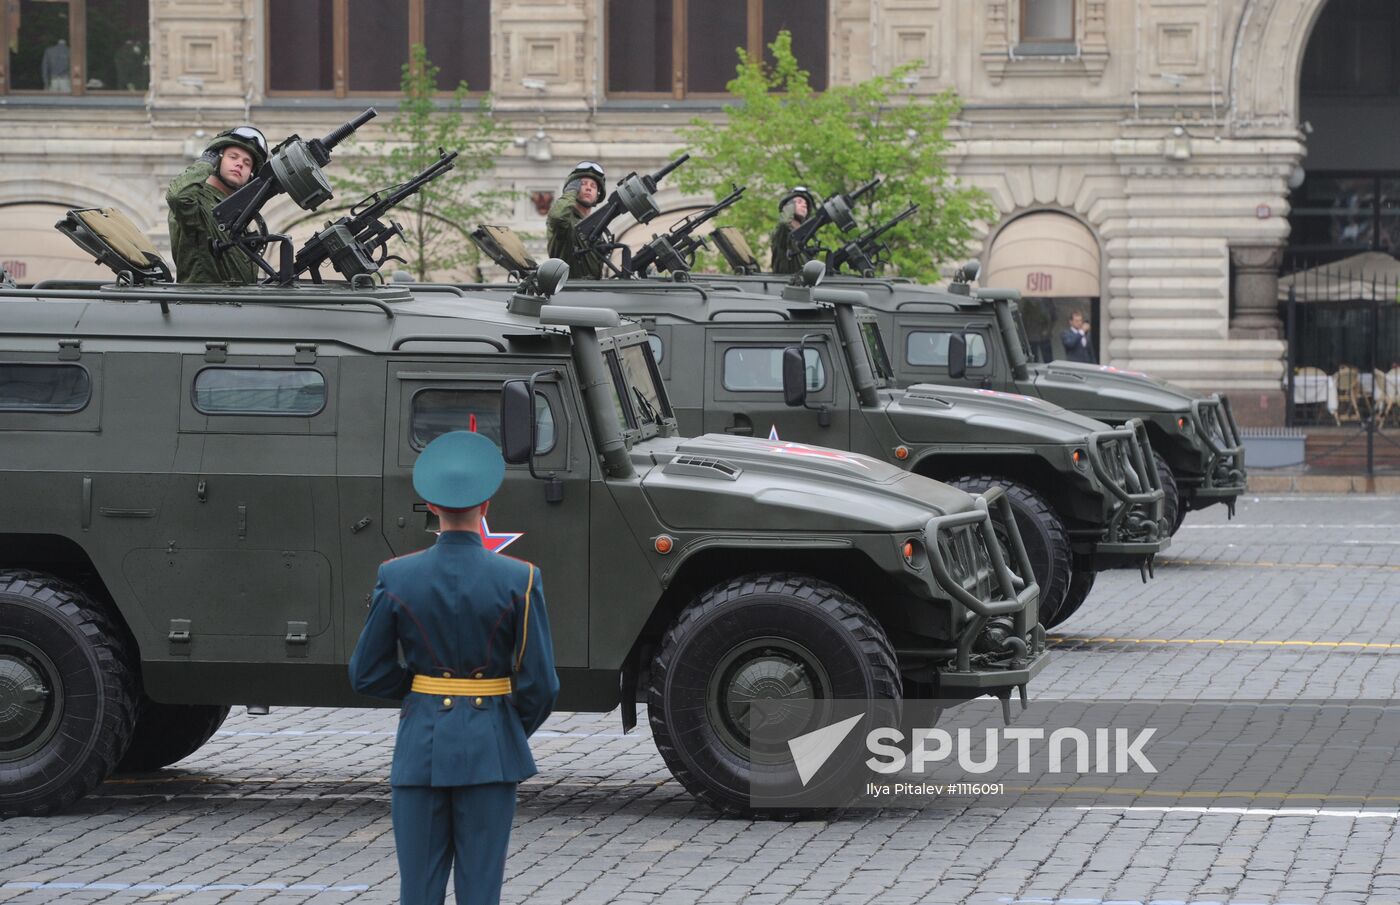 Victory Day parade